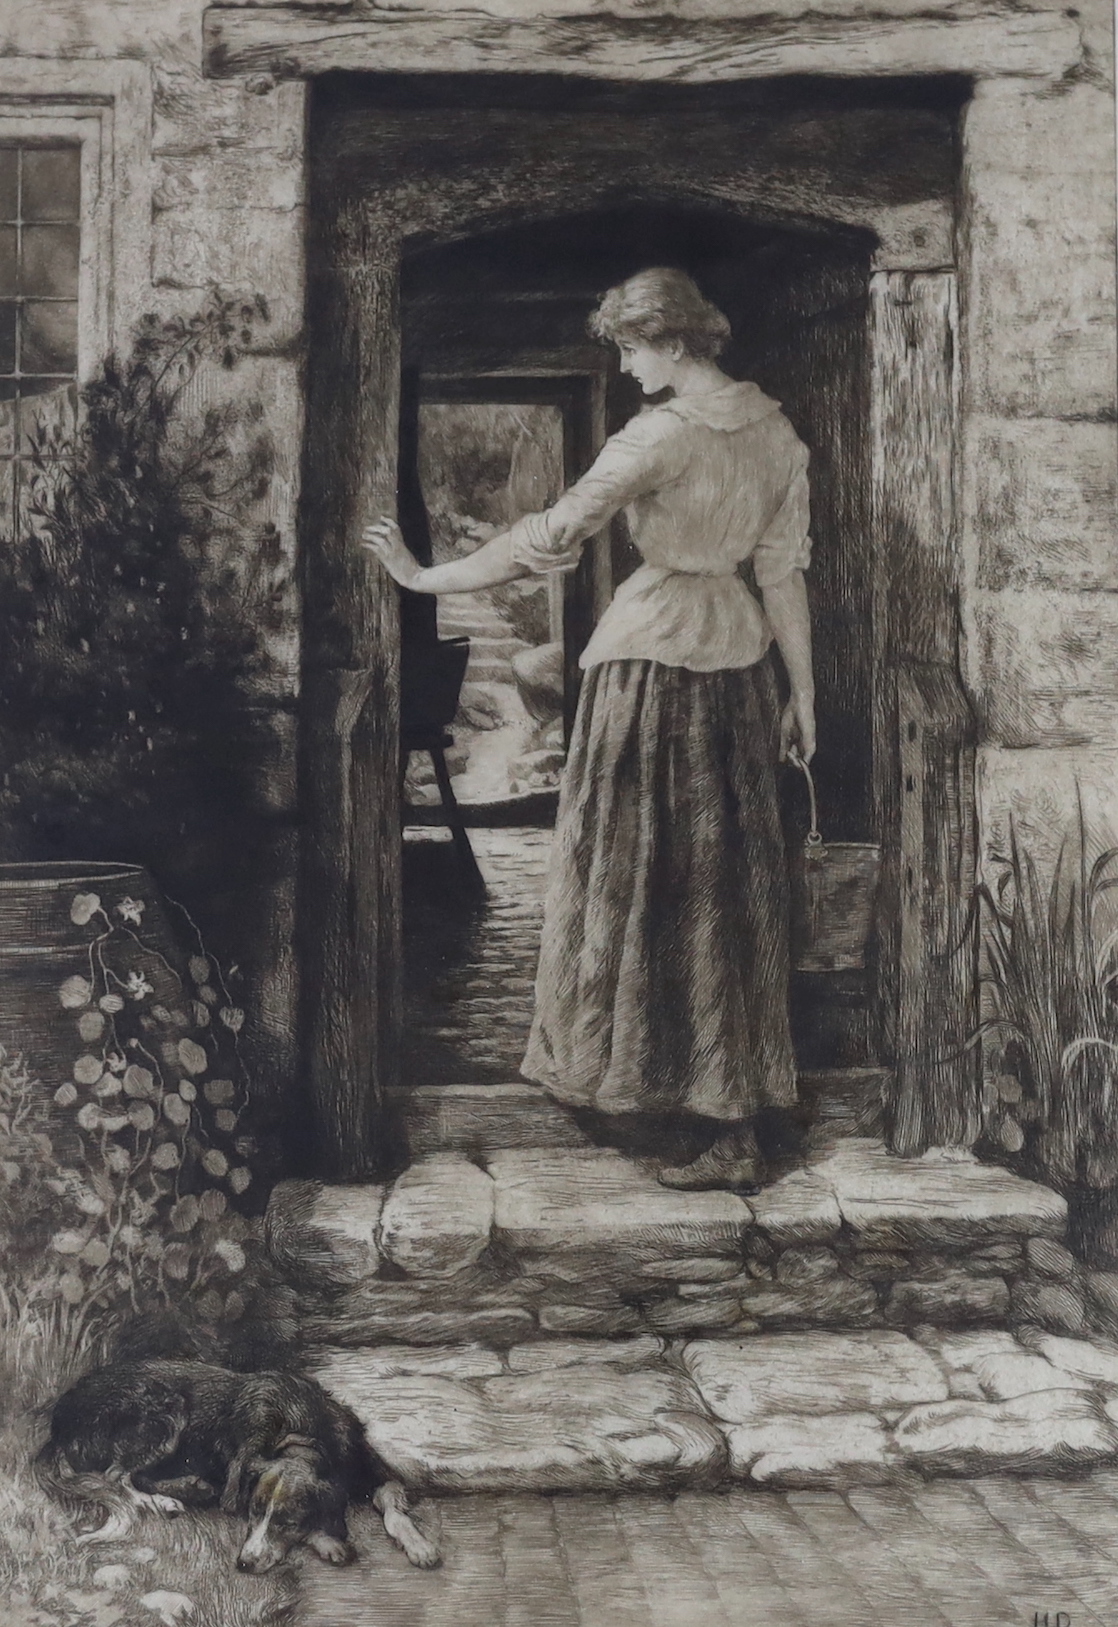 Herbert Dicksee (1862-1942), two etchings, On the Threshold (Herbert Dicksee's wife, Ella Maria) & Lucky Dog, each signed in pencil, publ. 1901 & 1908, 47 x 32cm